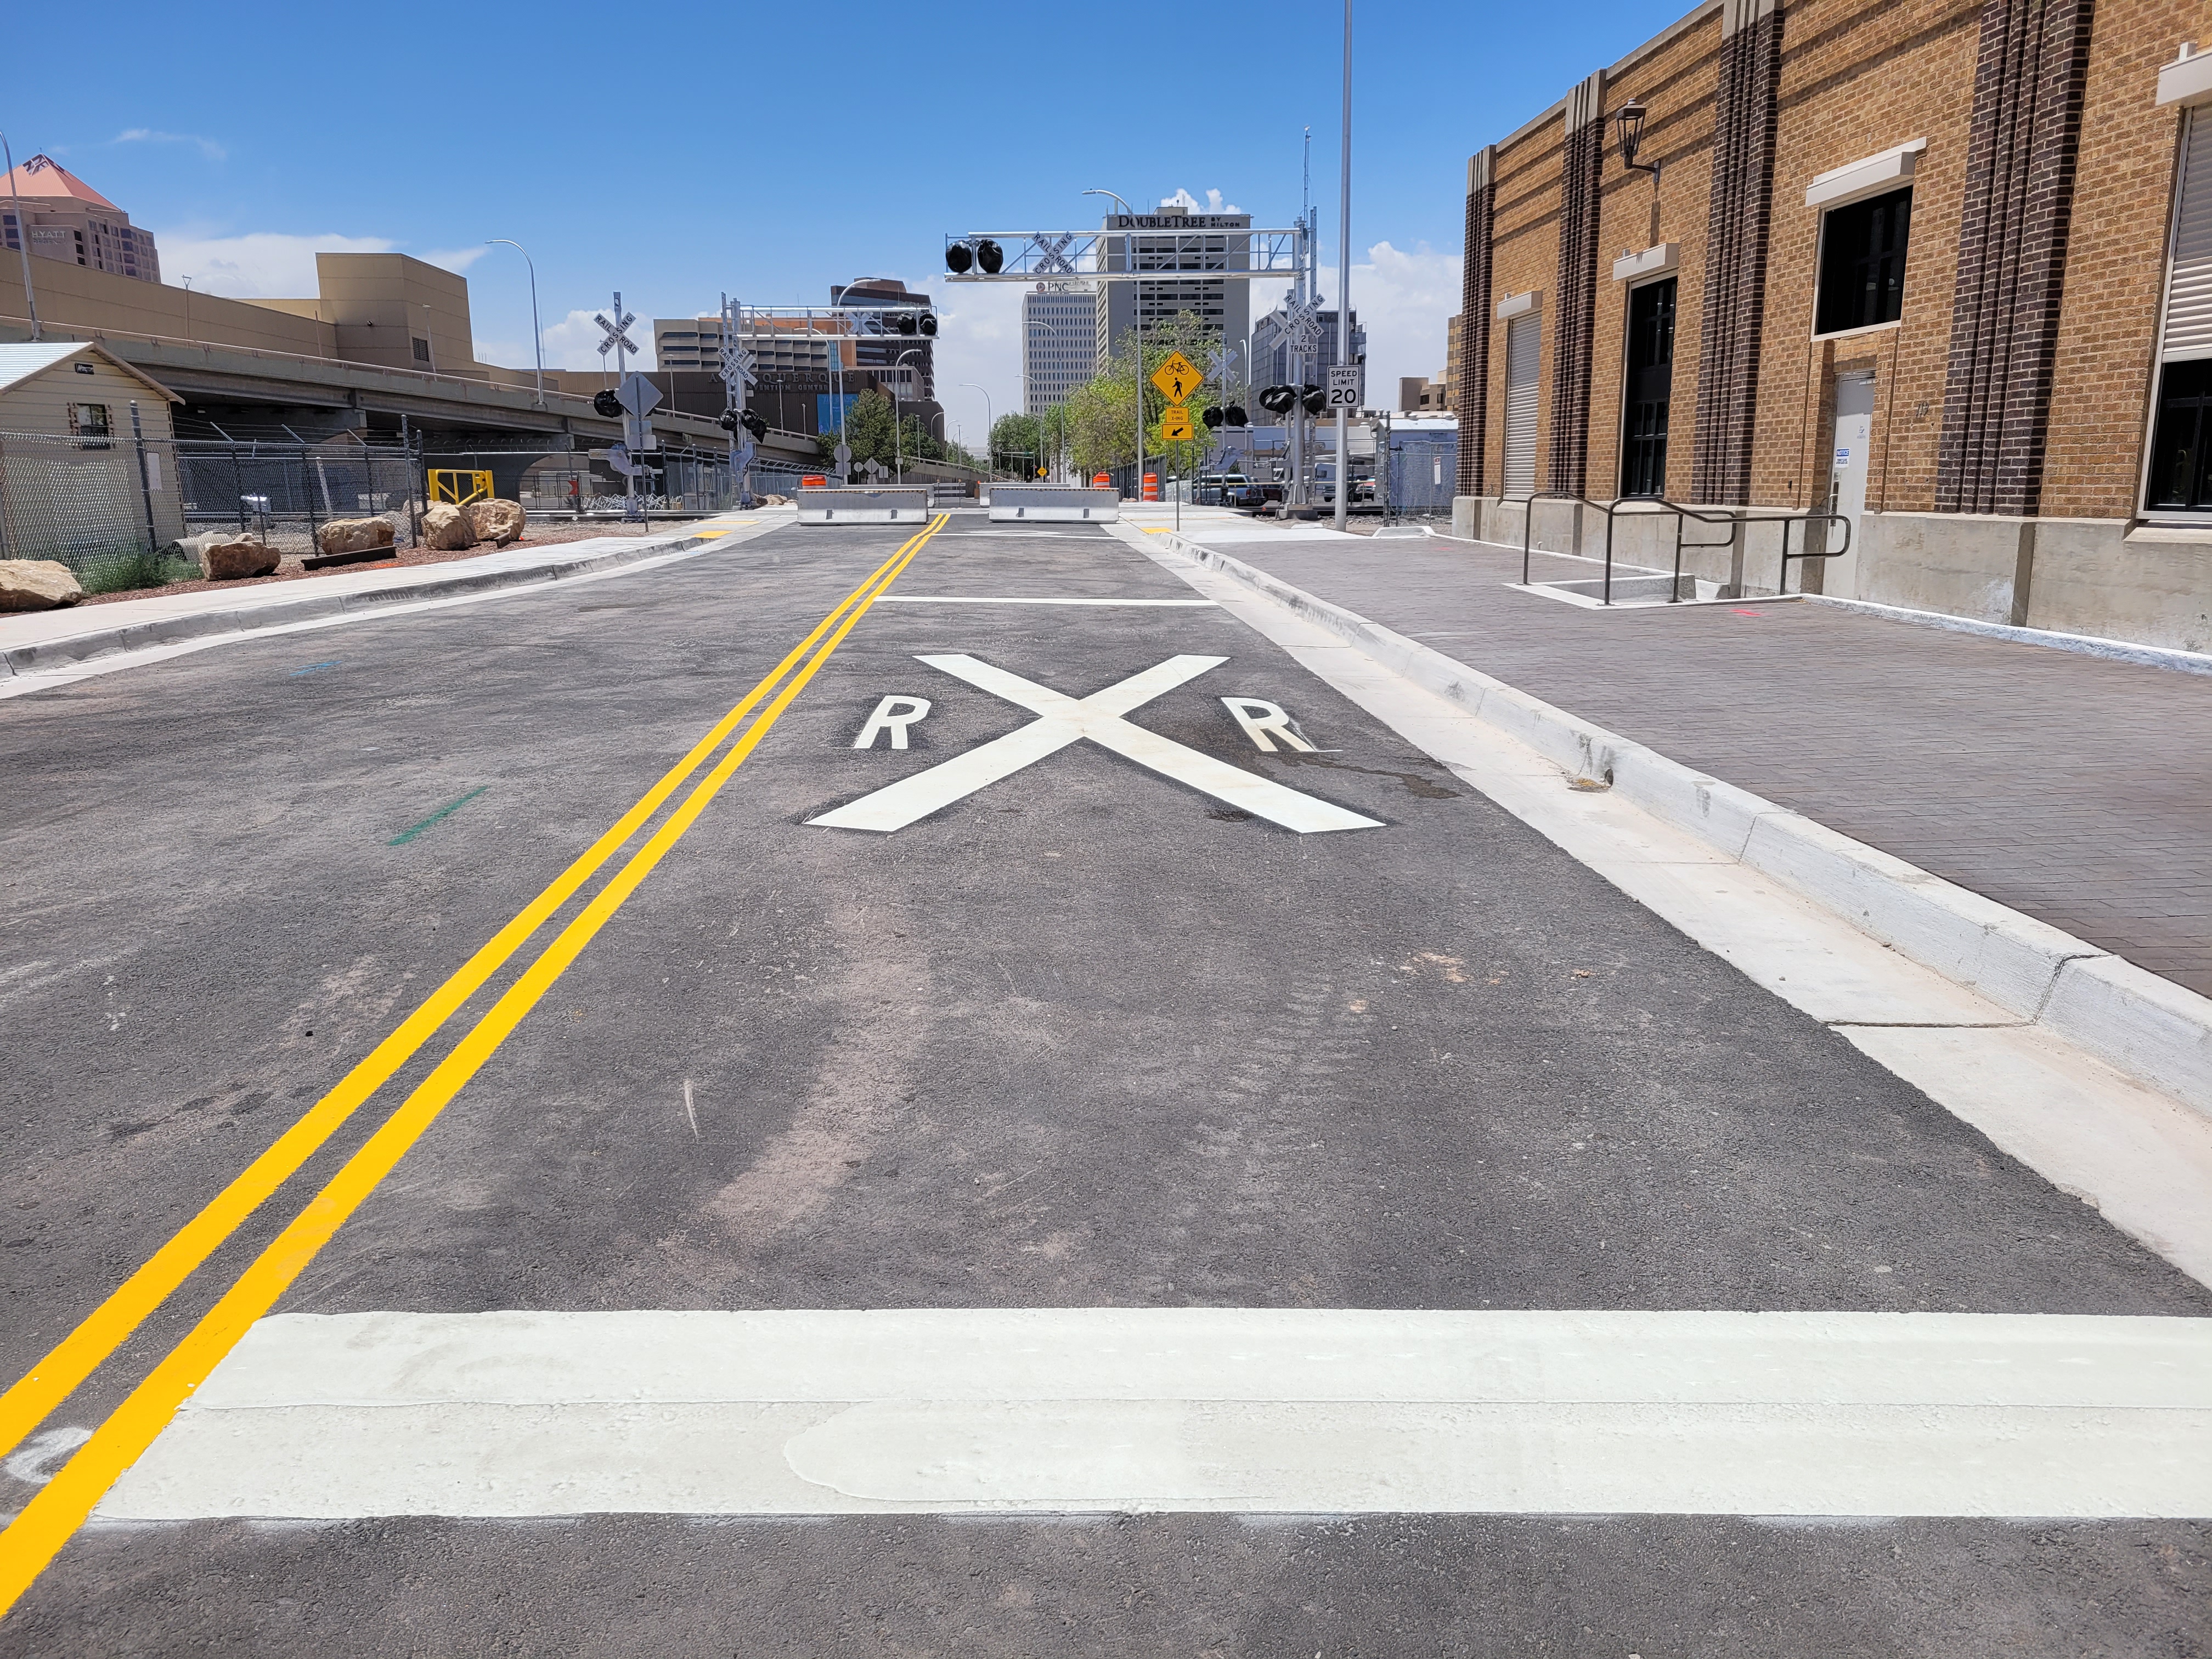 A photo of a downtown Albuquerque street crossing.